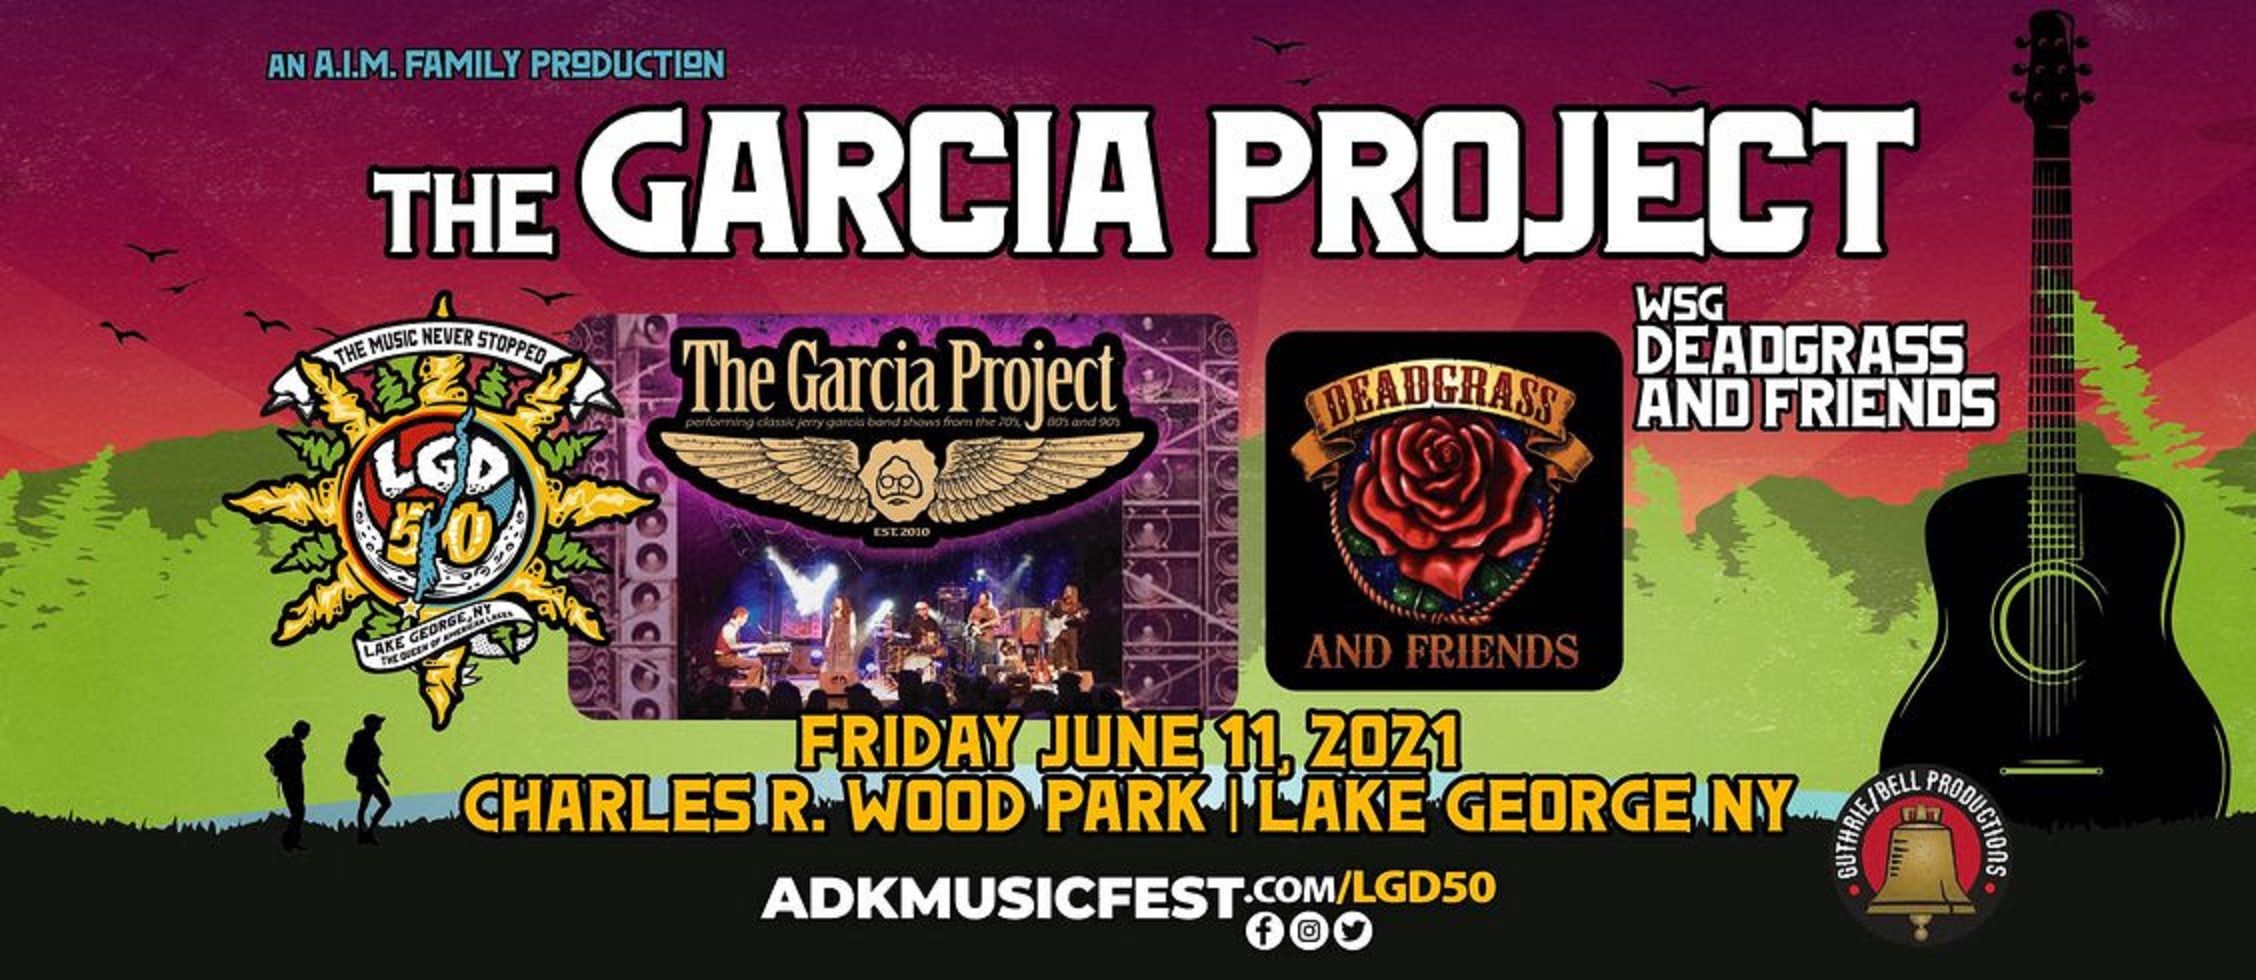 The Garcia Project in Lake George, NY on June 11, 2021